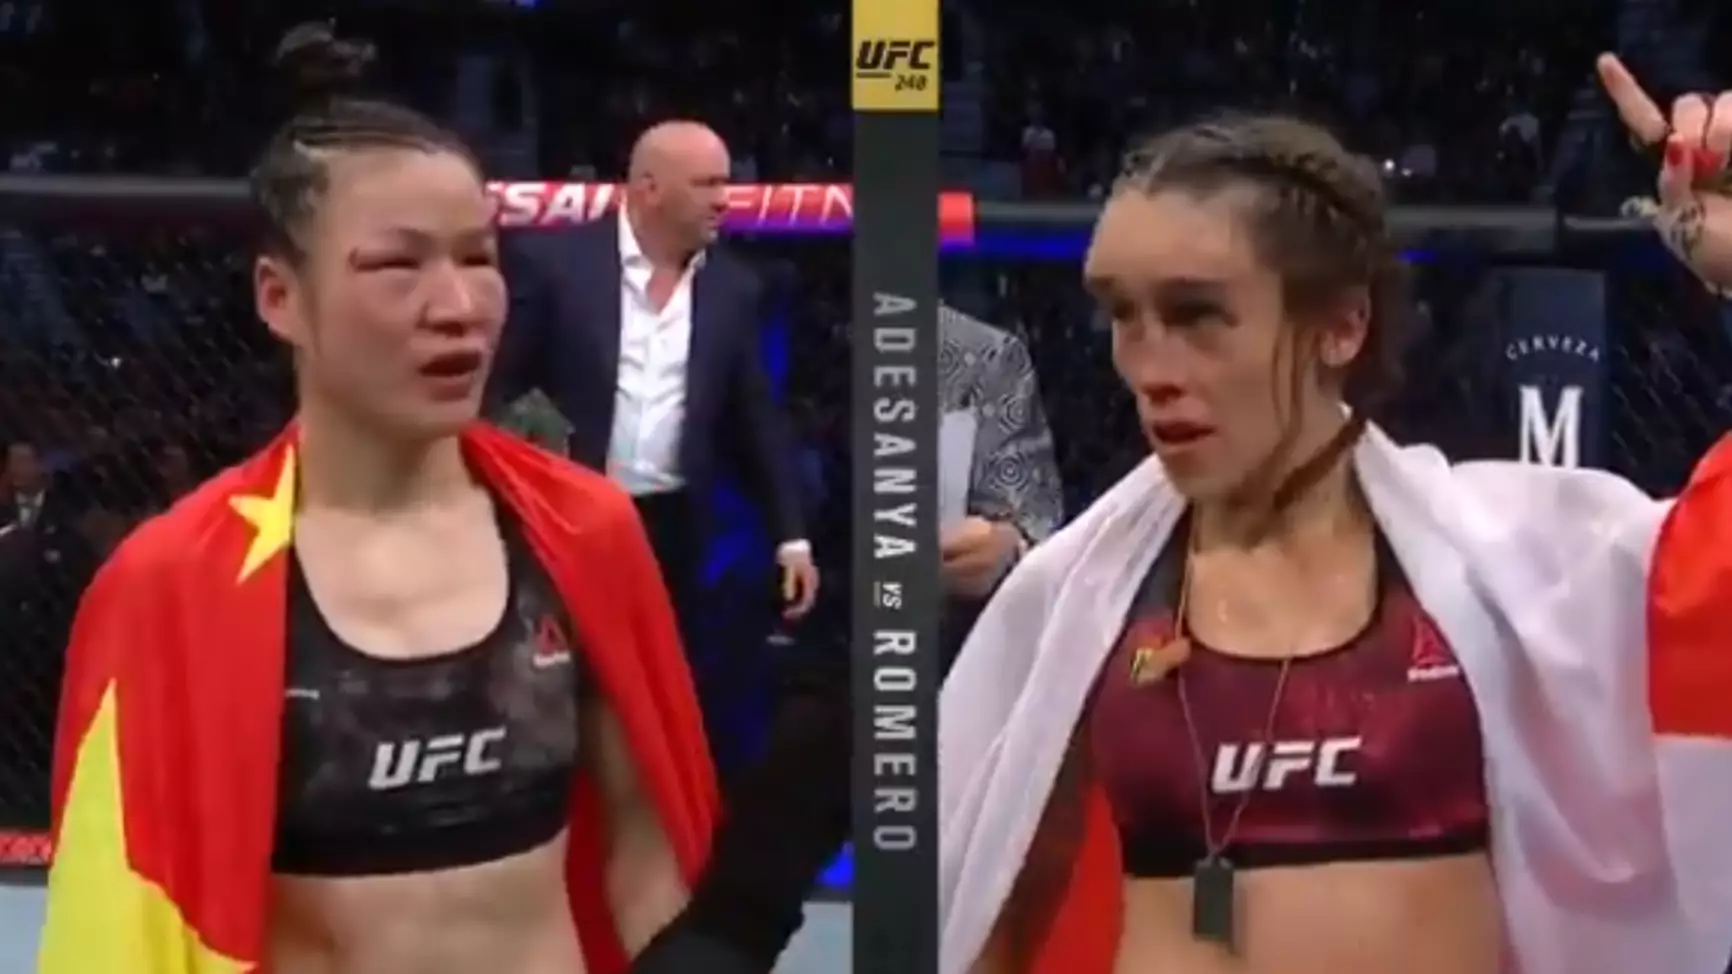 UFC's Joanna Jedrzejczyk Left With Huge Swellings After Zhang Weili Fight 